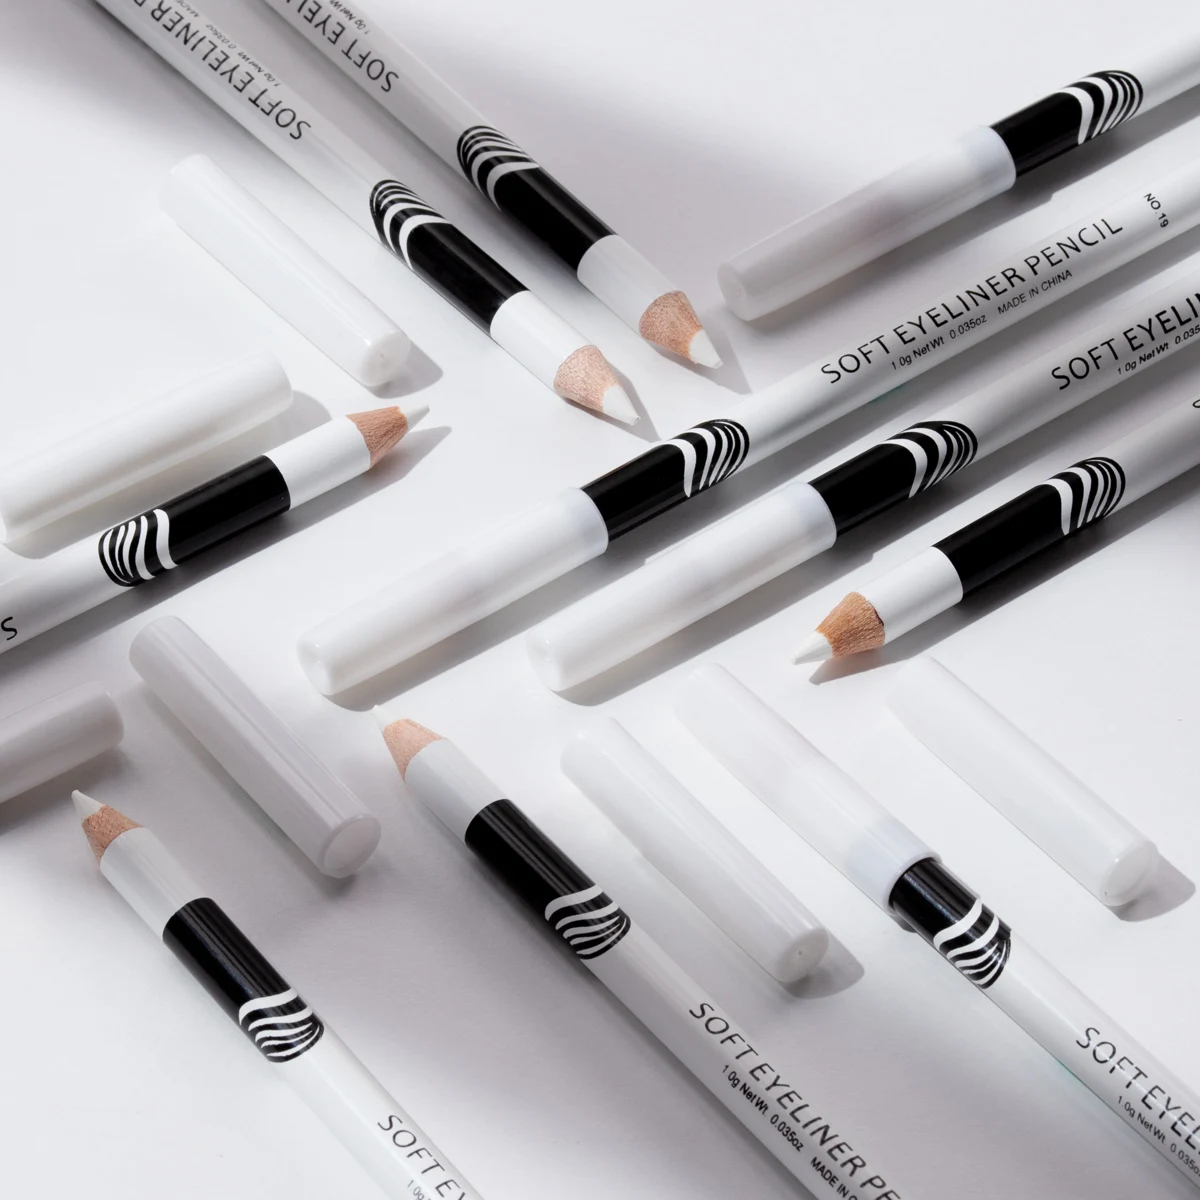 

Menow P112 12 pieces/box Makeup Silky Wood Cosmetic White Soft Eyeliner Pencil Menow highlight pencil